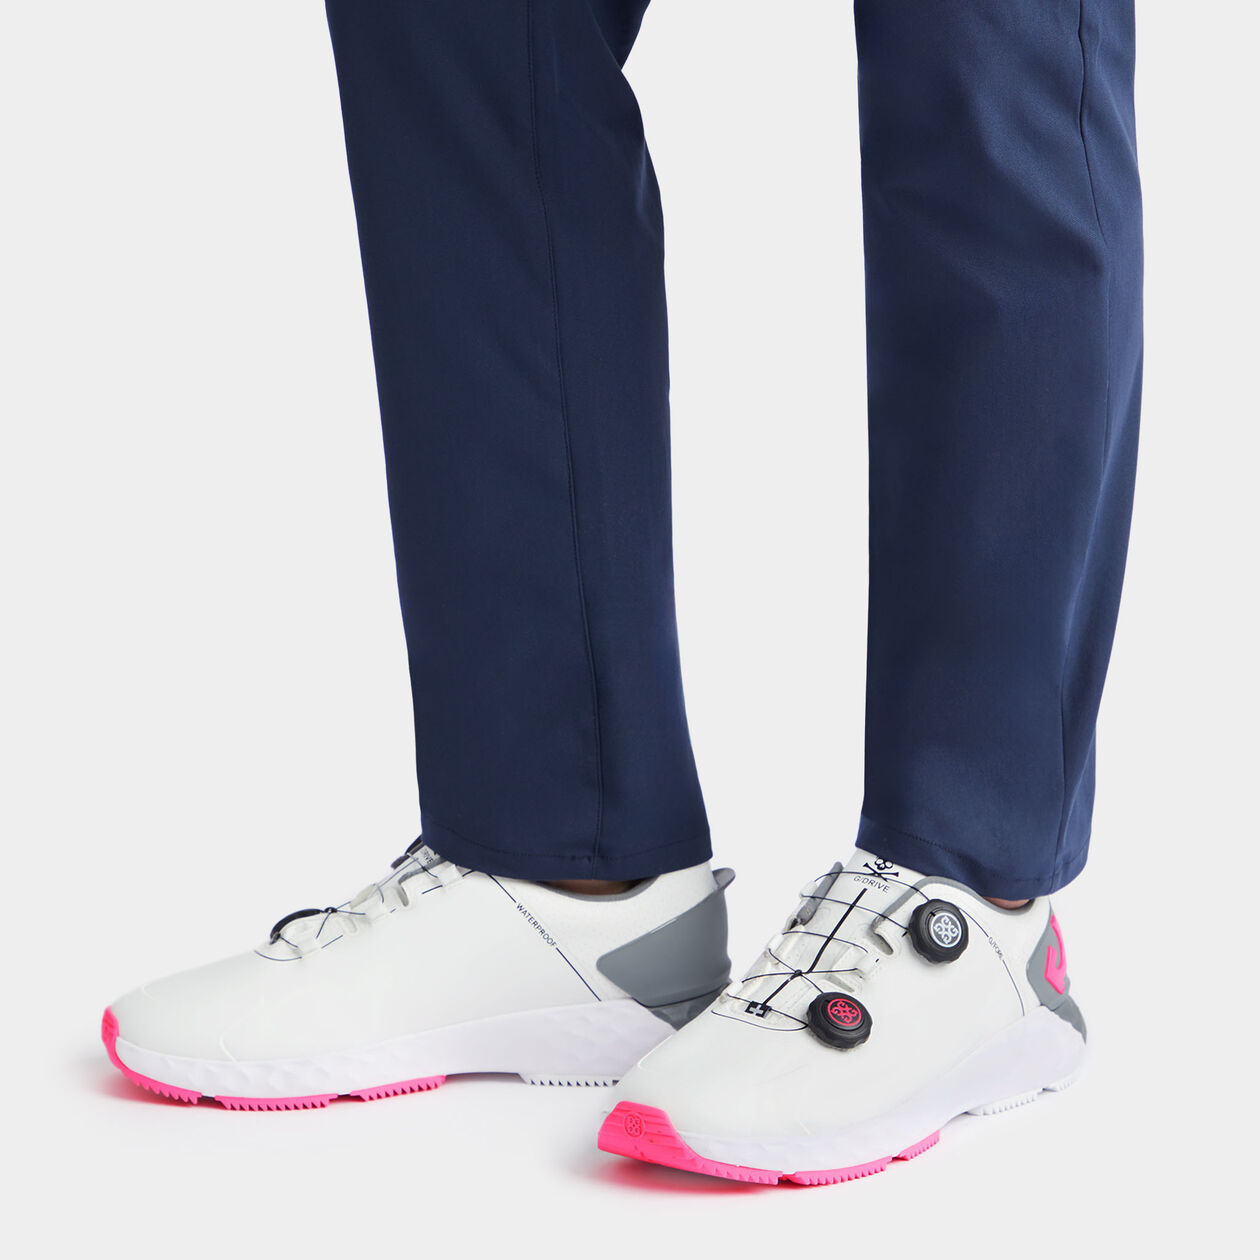 G/FORE G/DRIVE Golf Shoes - Nimbus